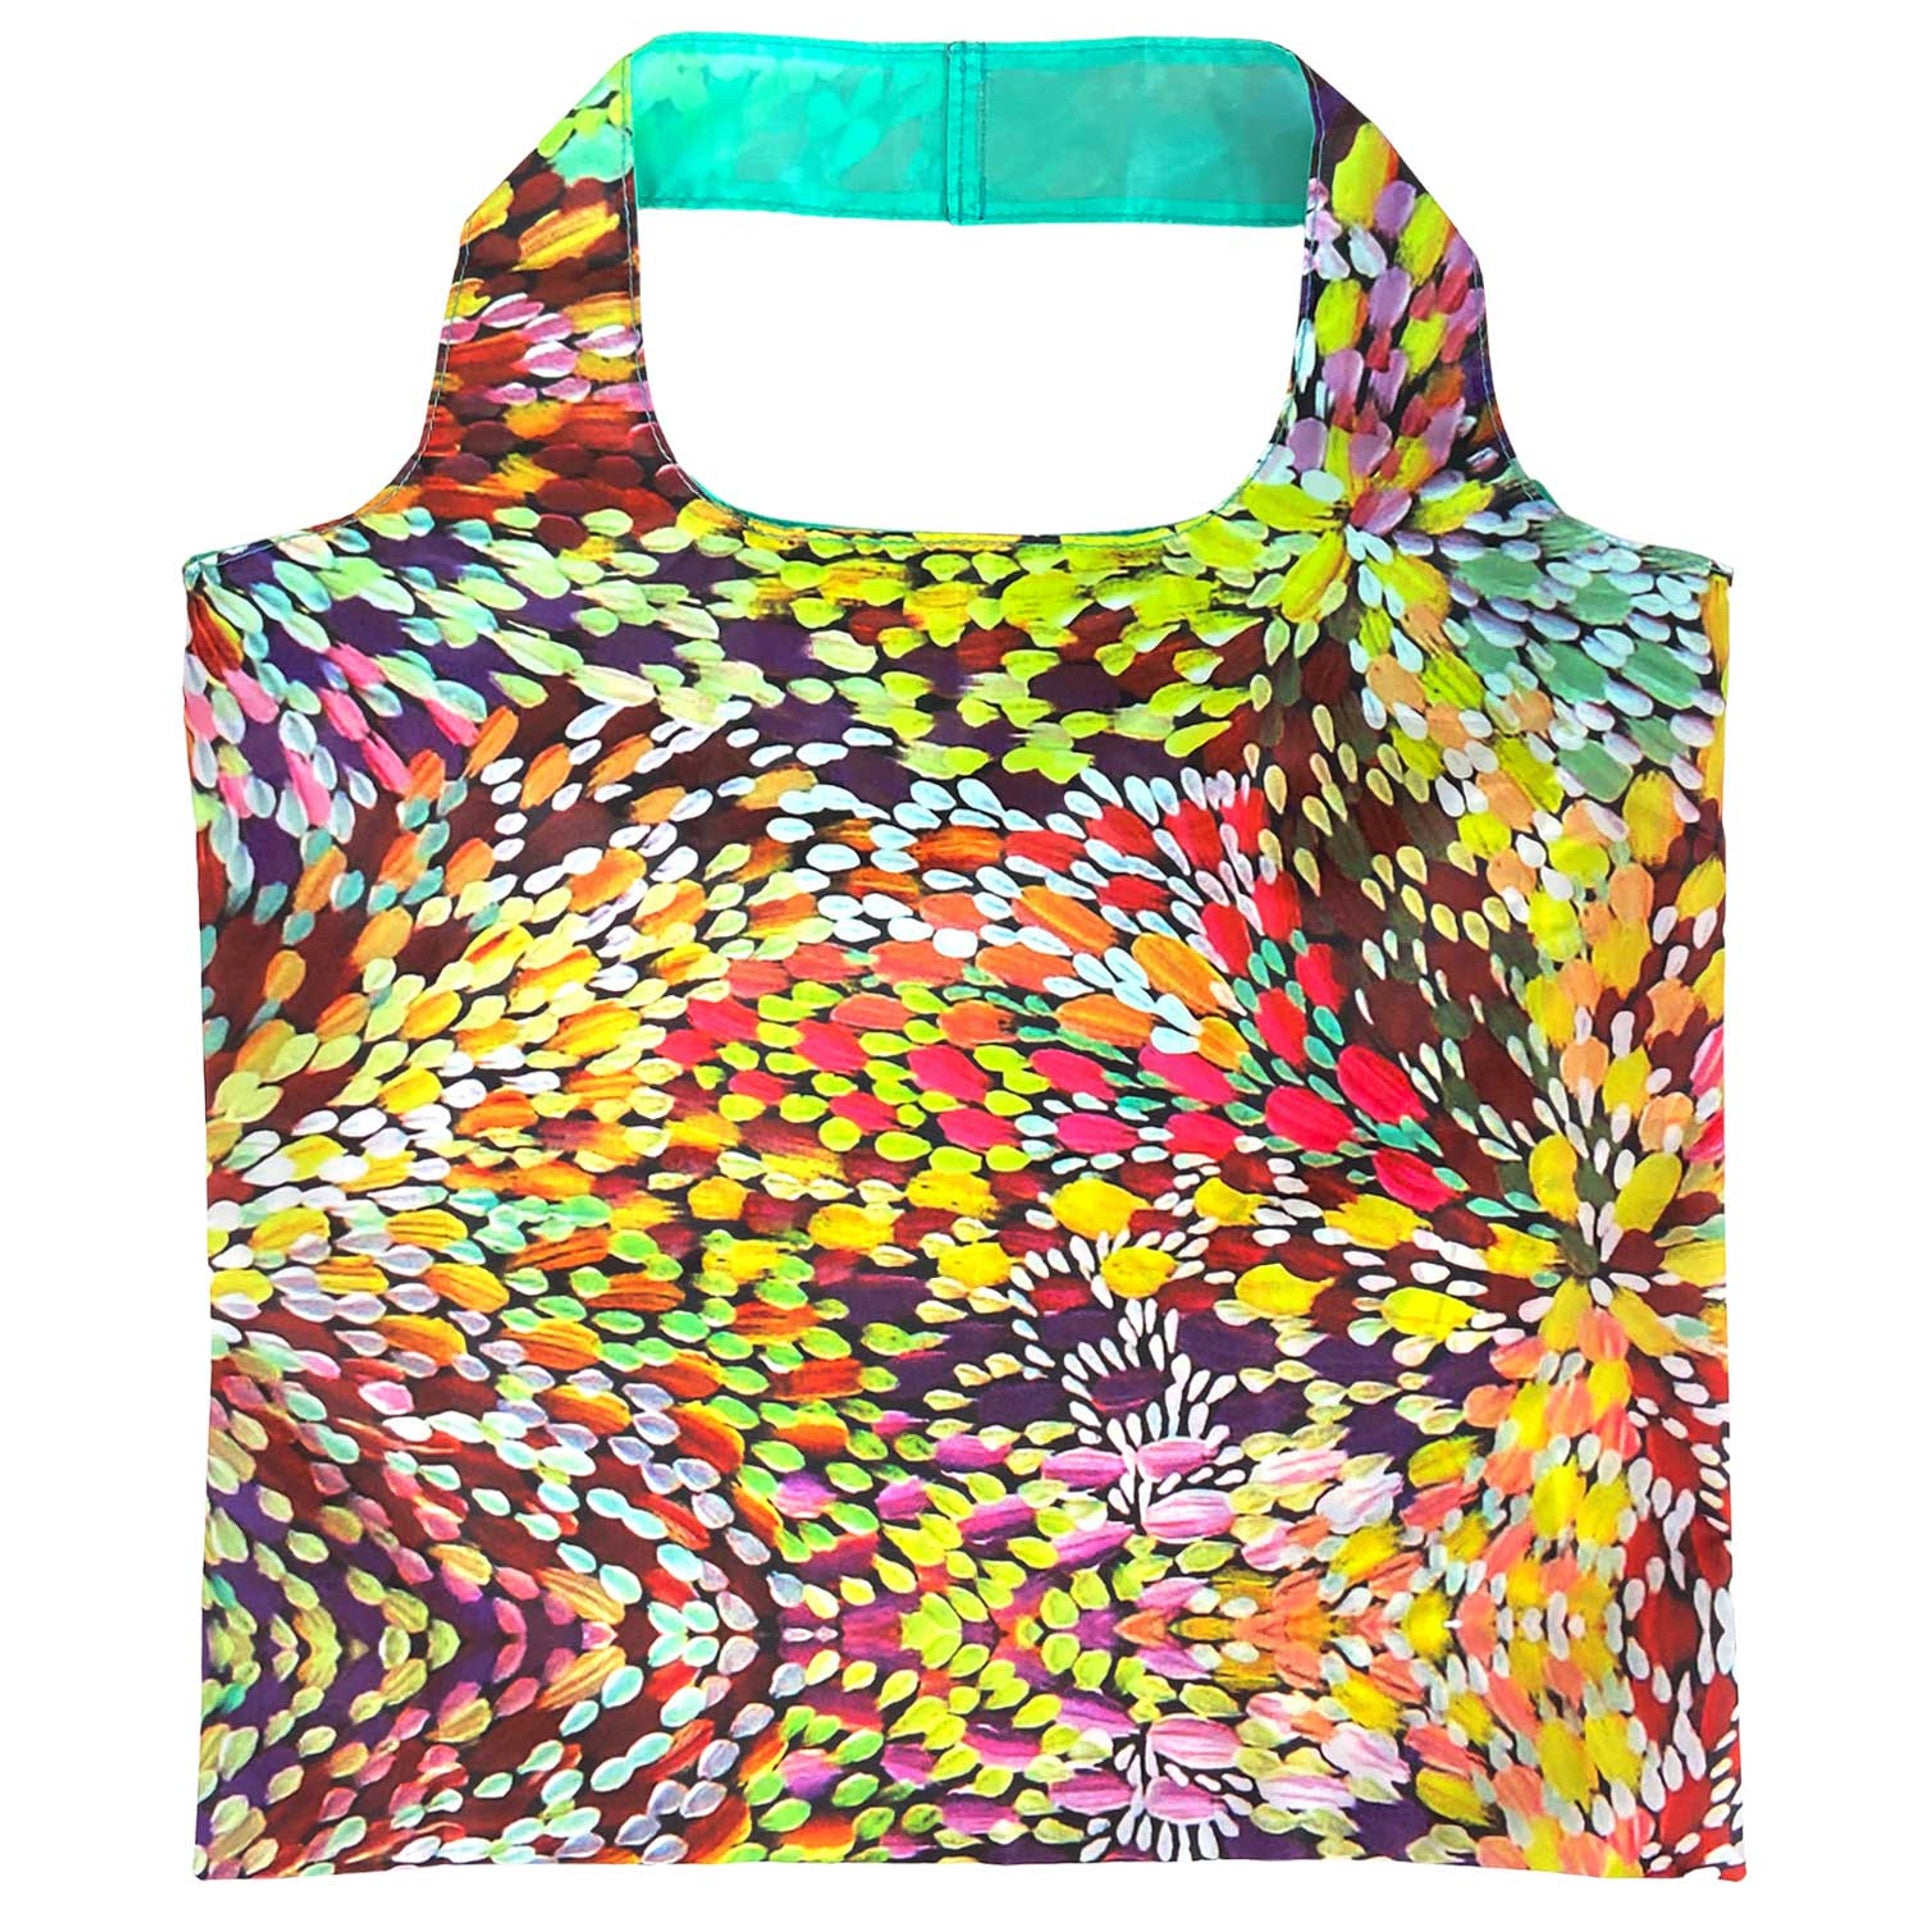 Foldable Shopping Bag (Recycled) - Janelle Stockman - Multi